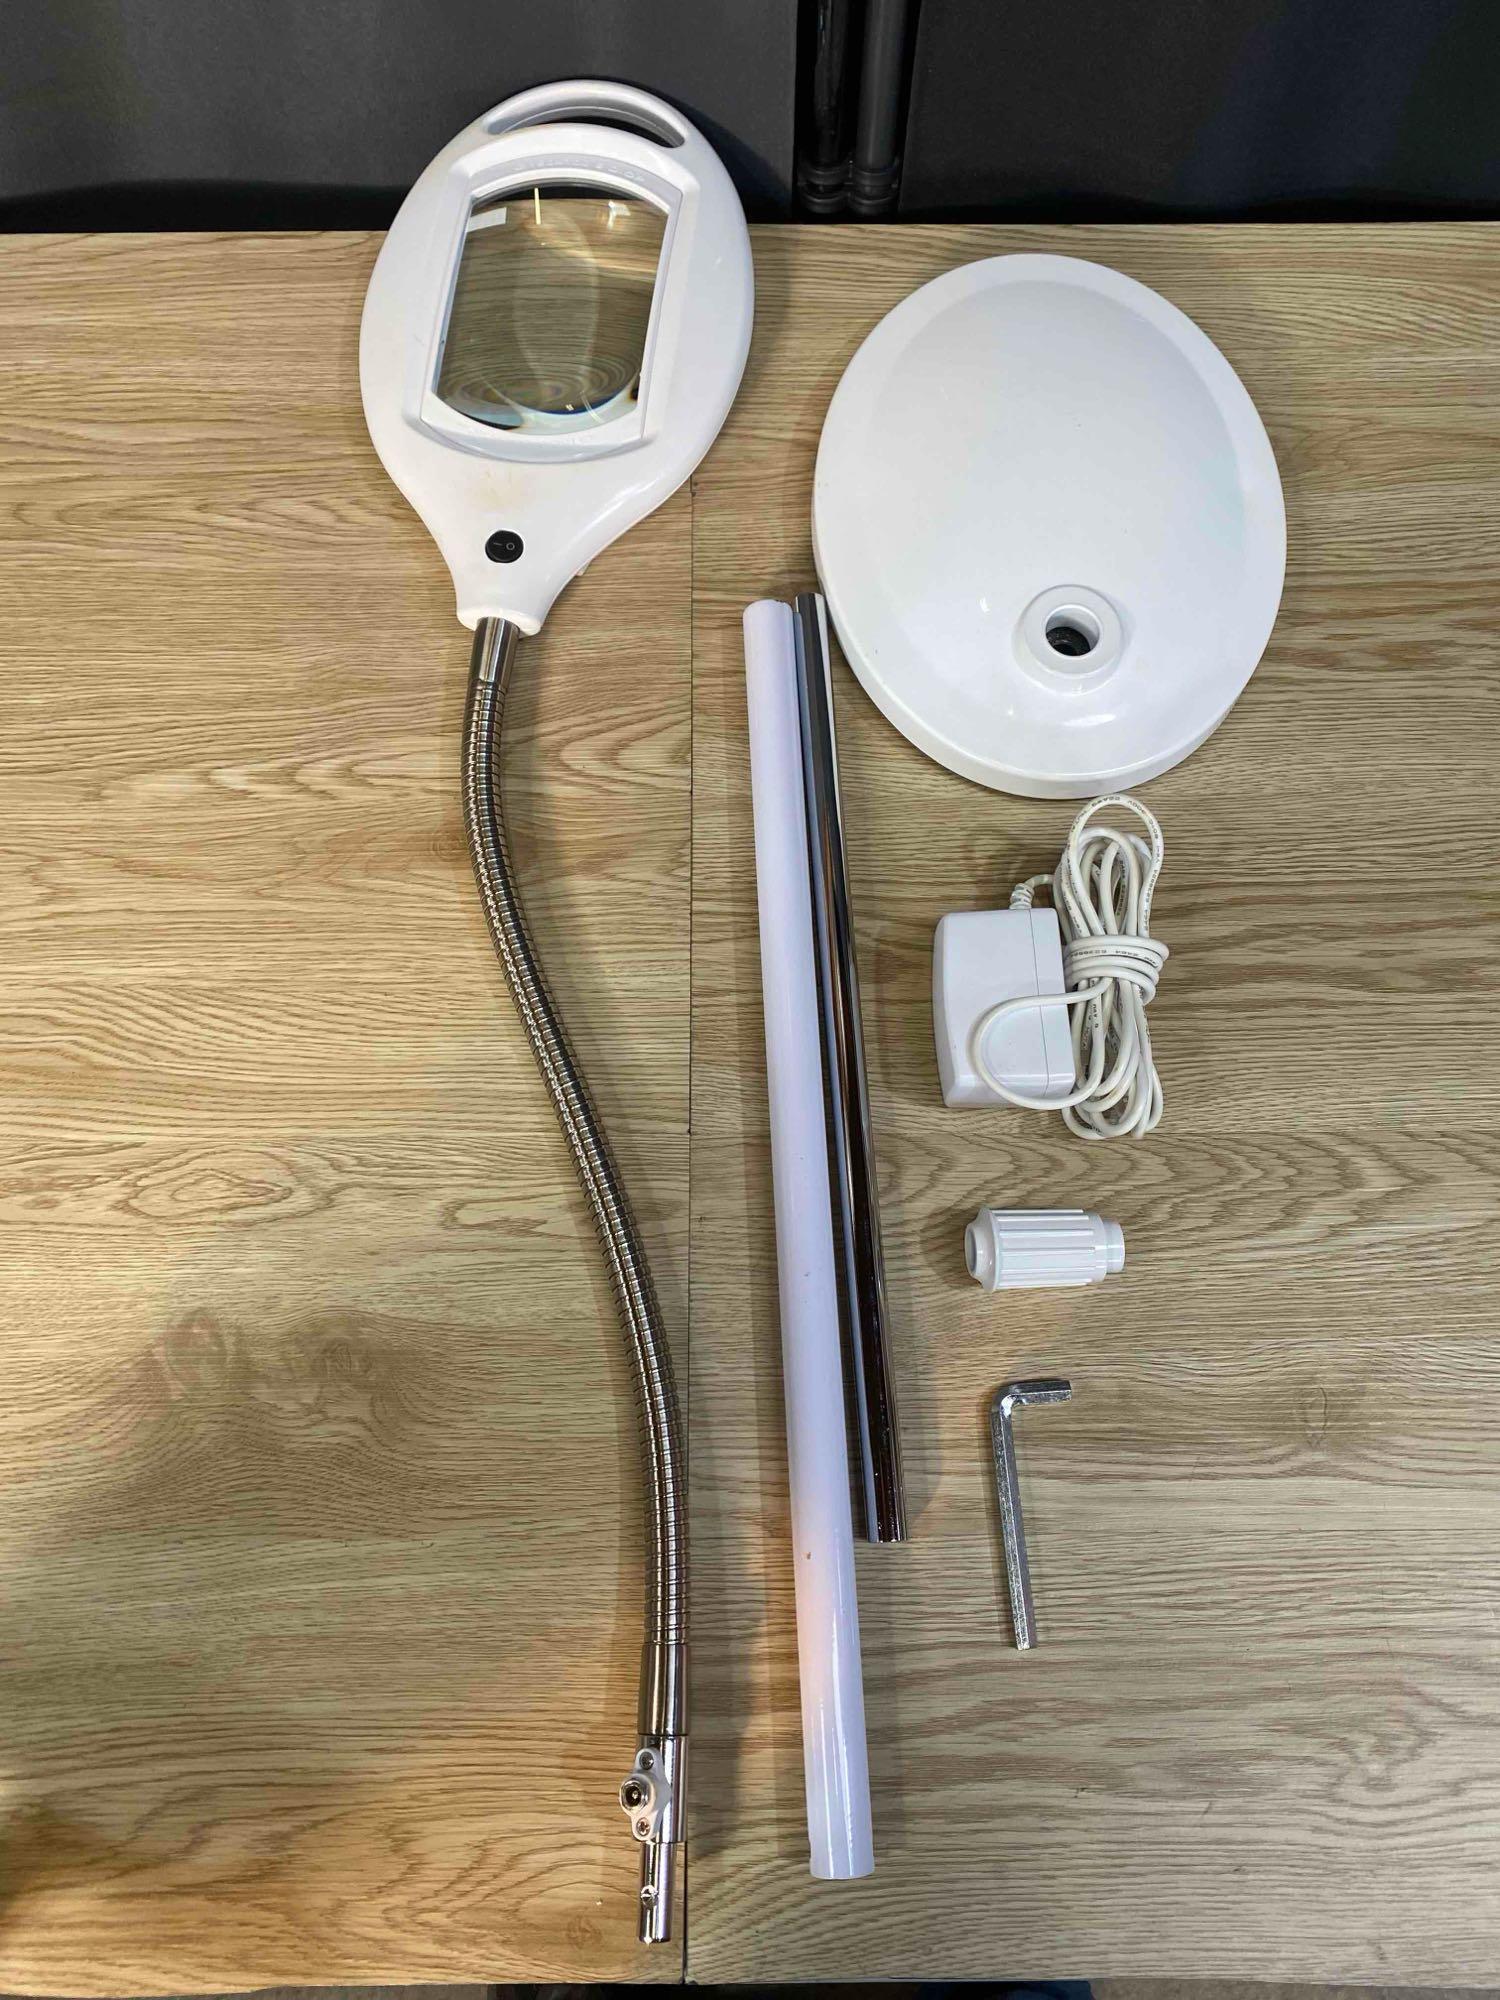 Brightech LightView Pro Magnifying Floor Lamp